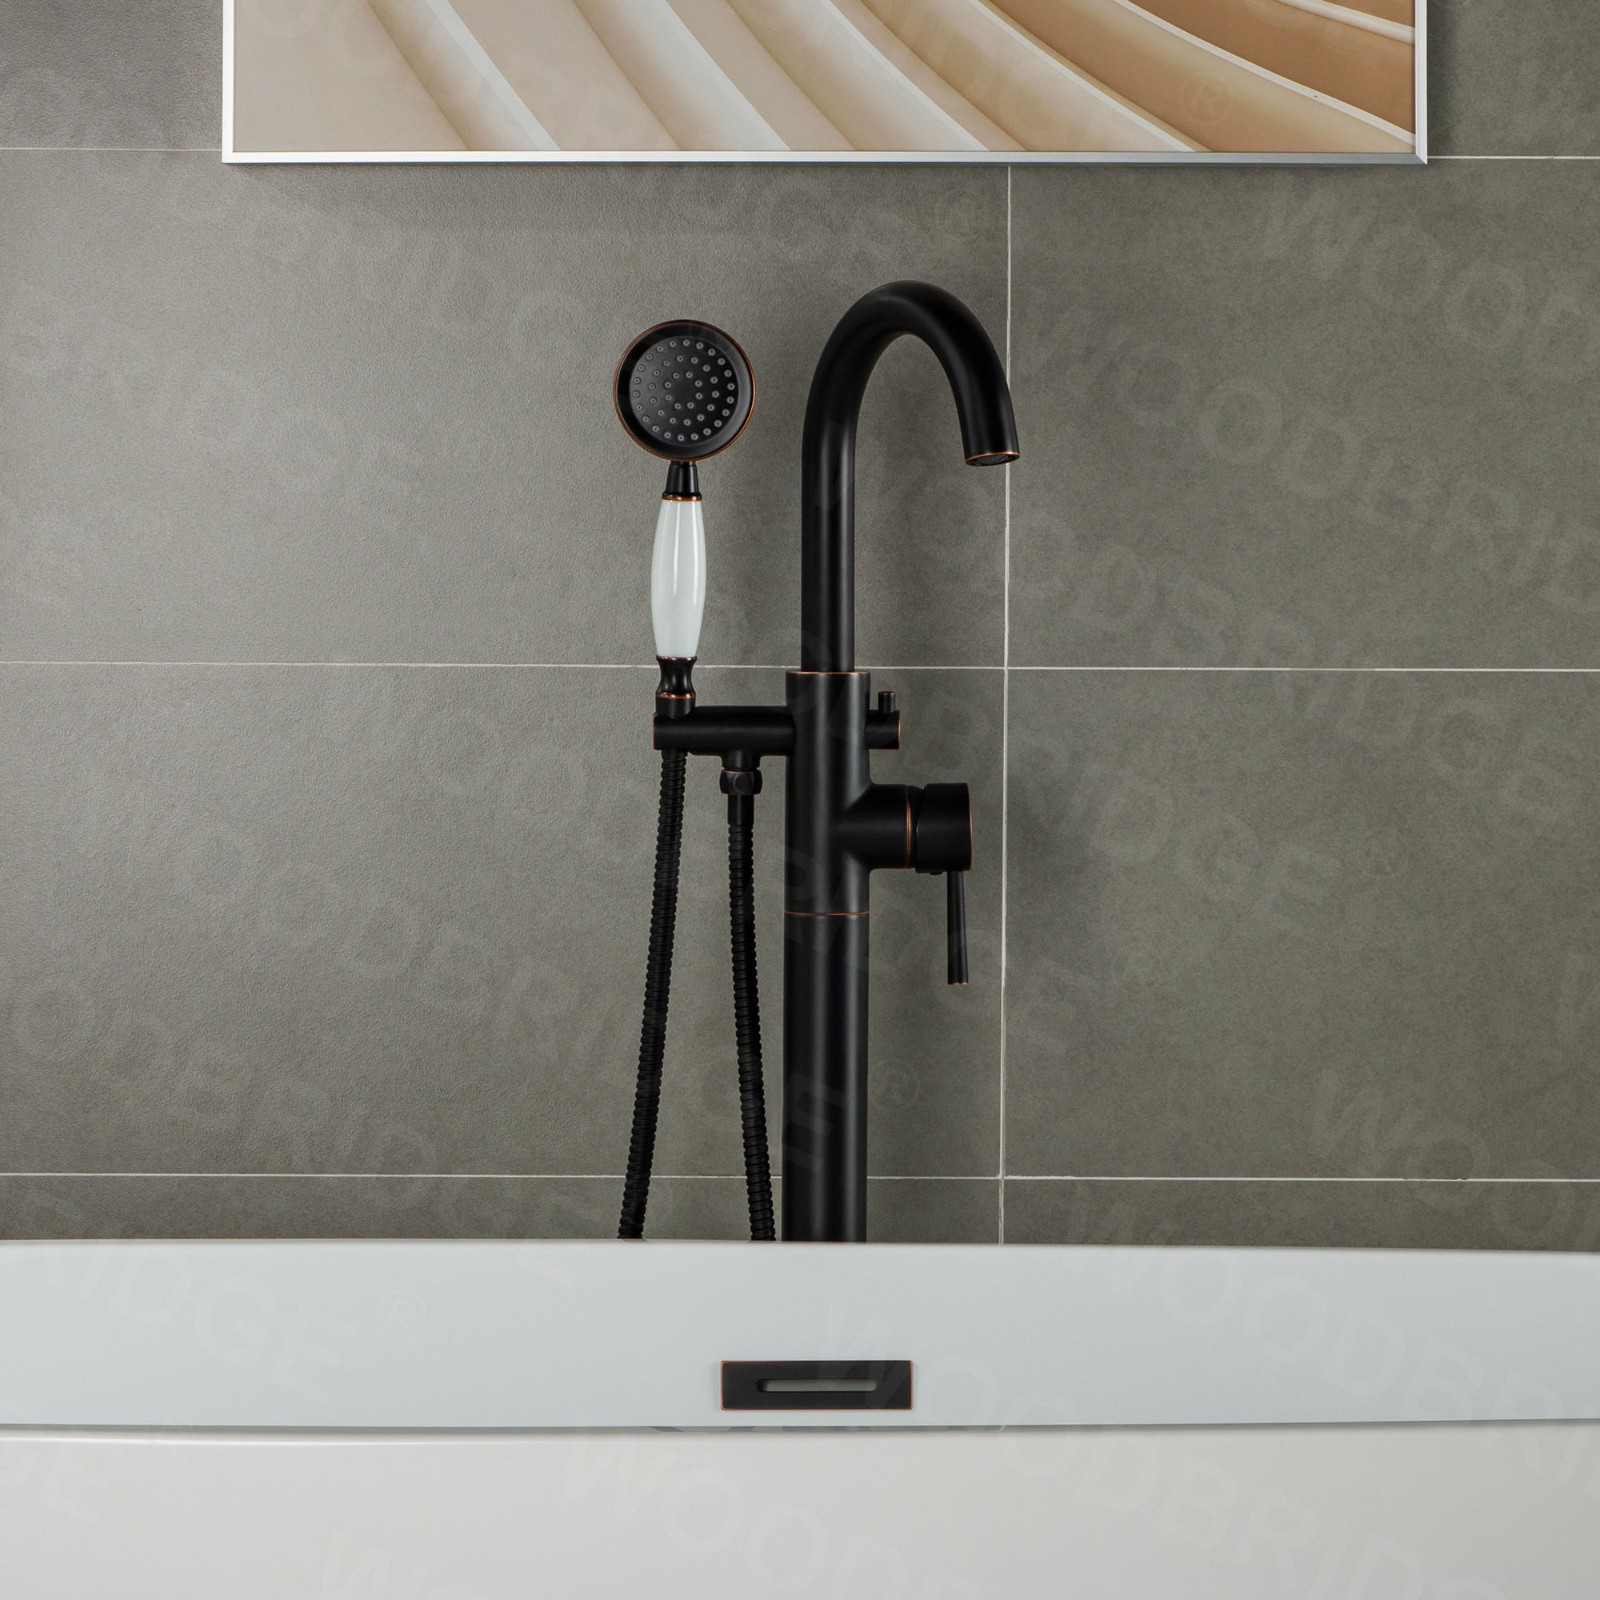  WOODBRIDGE Contemporary Single Handle Floor Mount Freestanding Tub Filler Faucet with Hand Shower in (Oil Rubbed Bronze) Finish,F0010ORBVT_6044